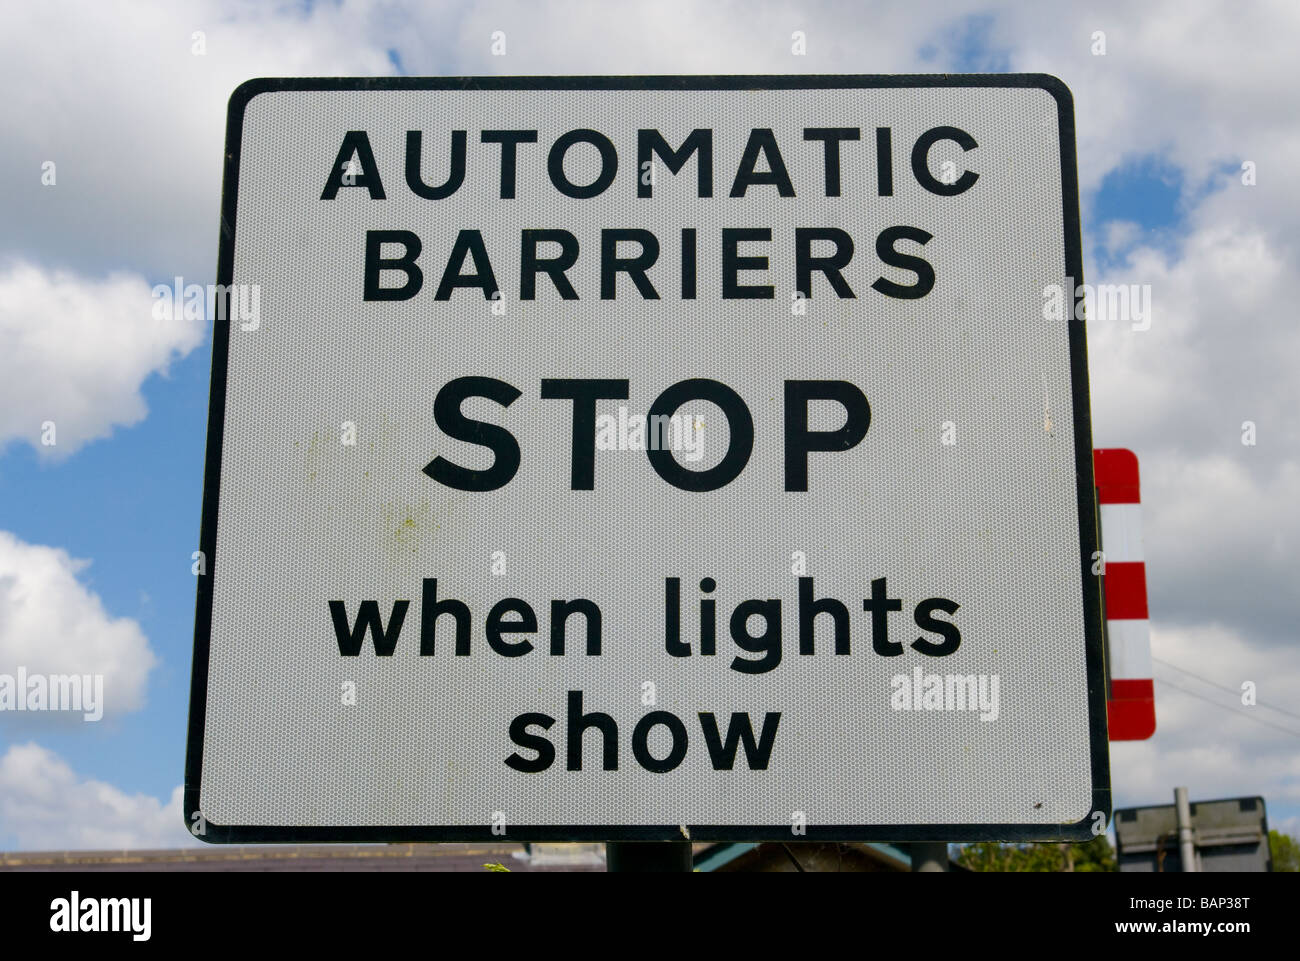 Automatic Barriers Stop When Lights Show Road Sign uk english Road traffic Sign Stock Photo